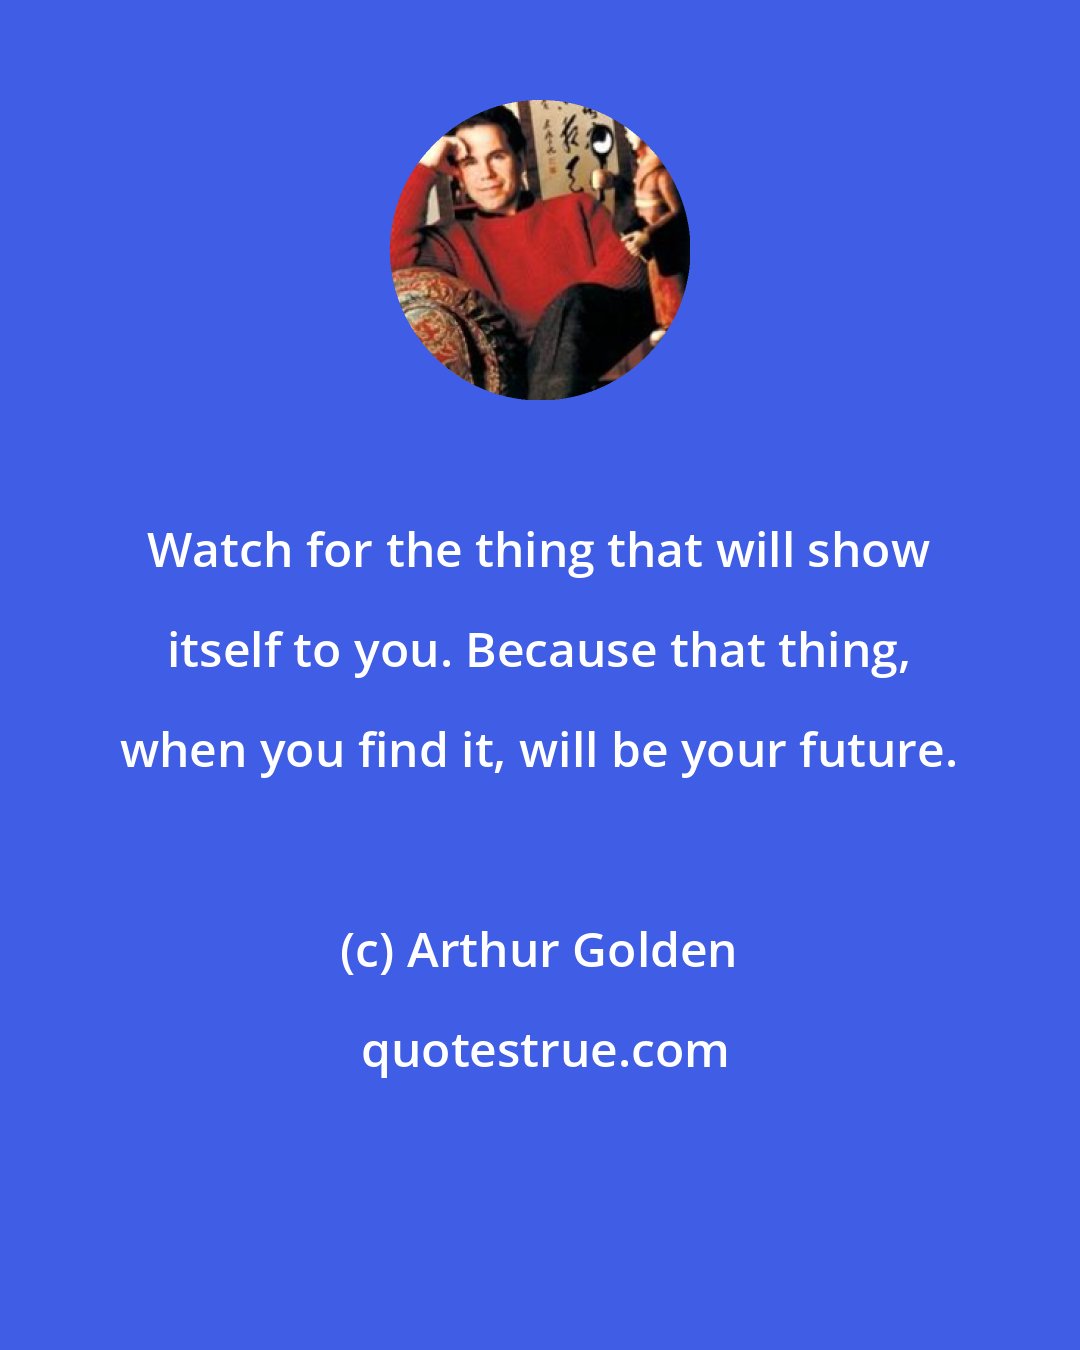 Arthur Golden: Watch for the thing that will show itself to you. Because that thing, when you find it, will be your future.